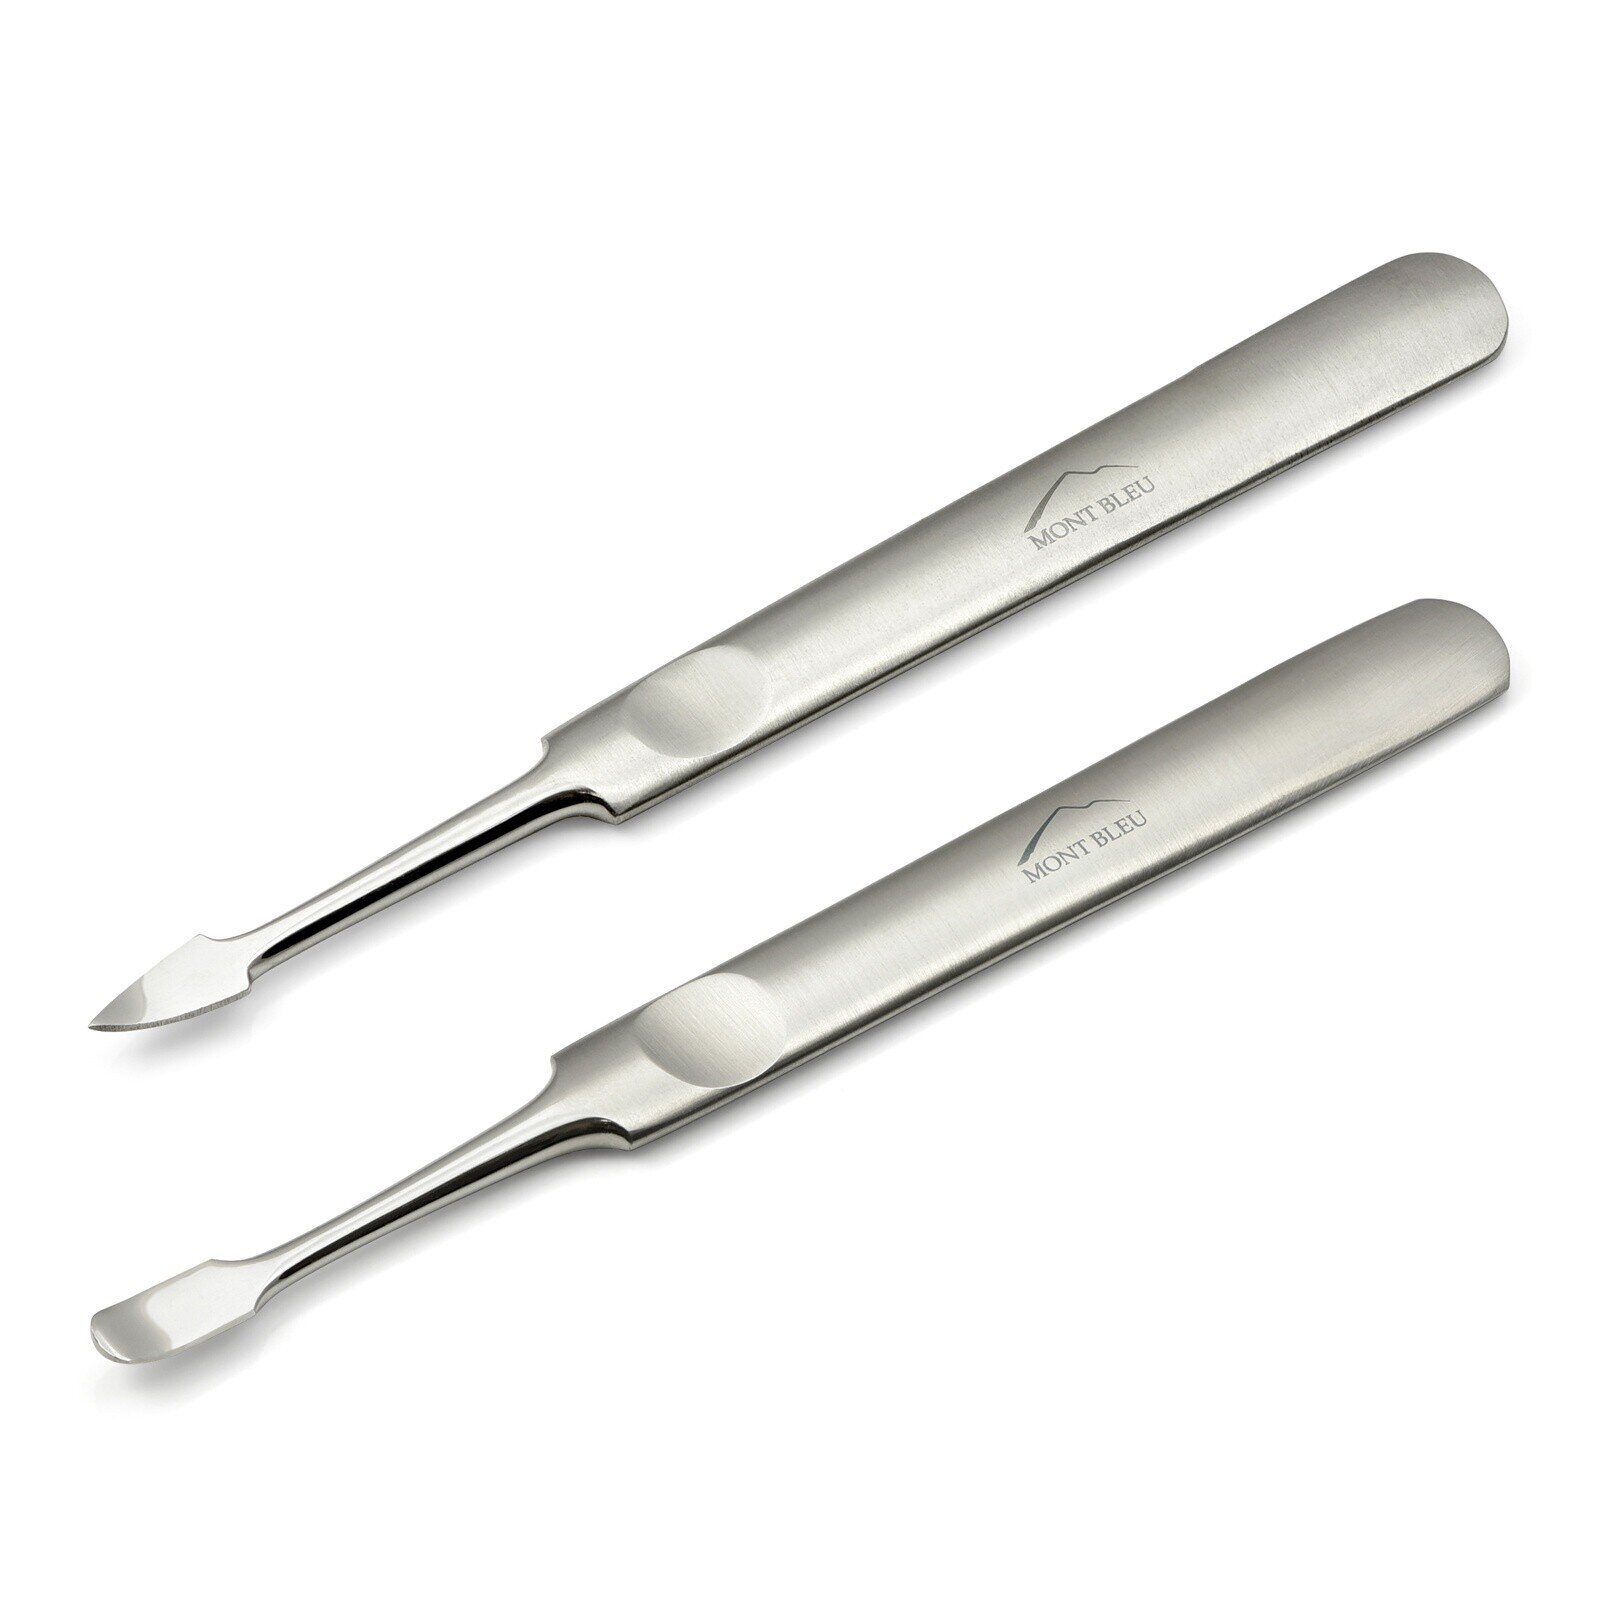 Matra Professional Nail Brush Cleaning Tool Pack of 2 - Manicure Pedicure  Scrubber Foot Cleaner Brush - MyMatra.com